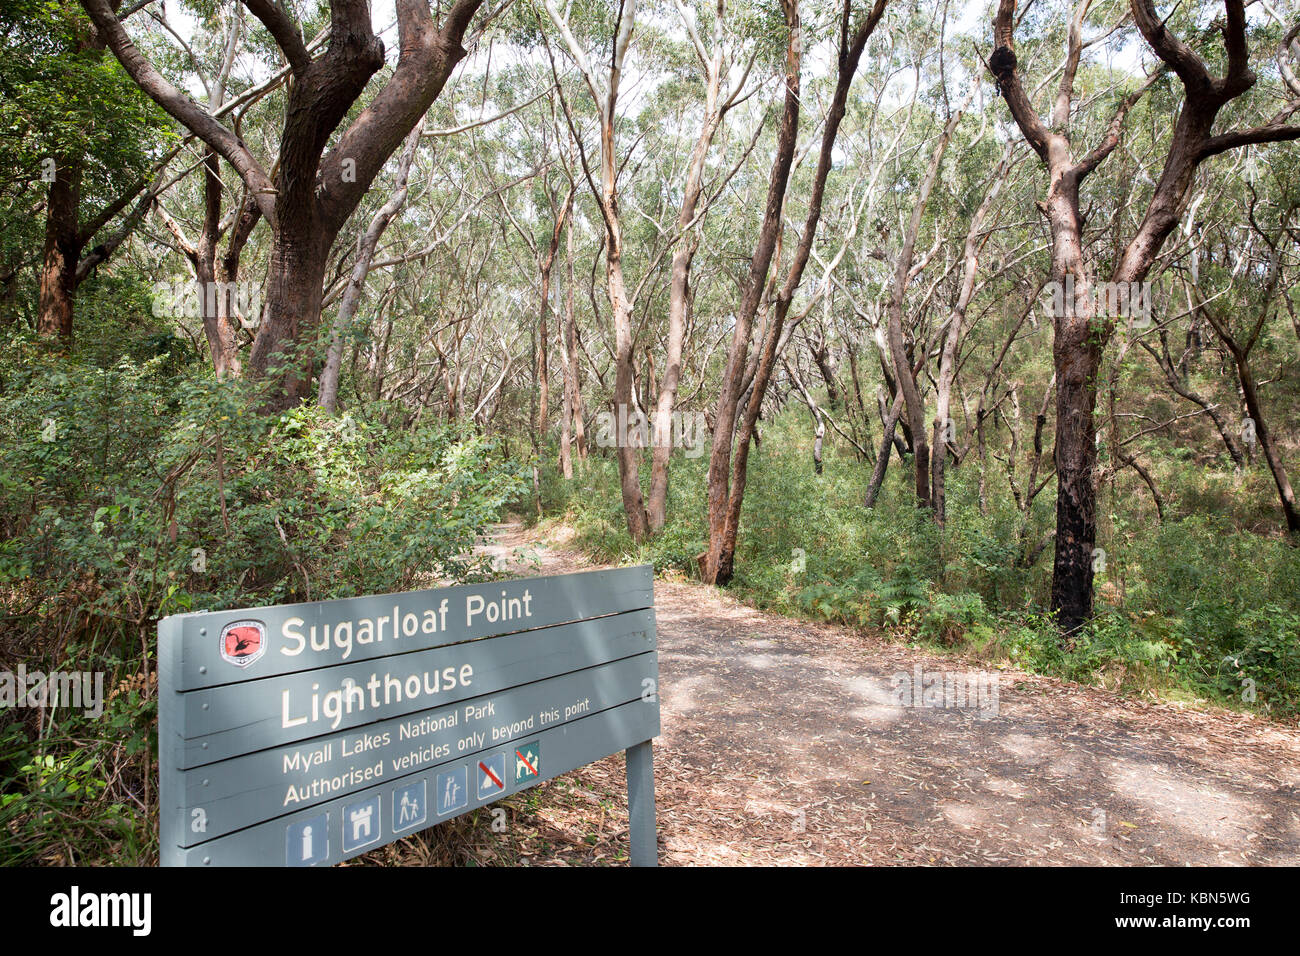 Entrance pathway to Sugarloaf Point lighthouse at Seal Rocks in Myall lakes national park,new south wales,Australia Stock Photo